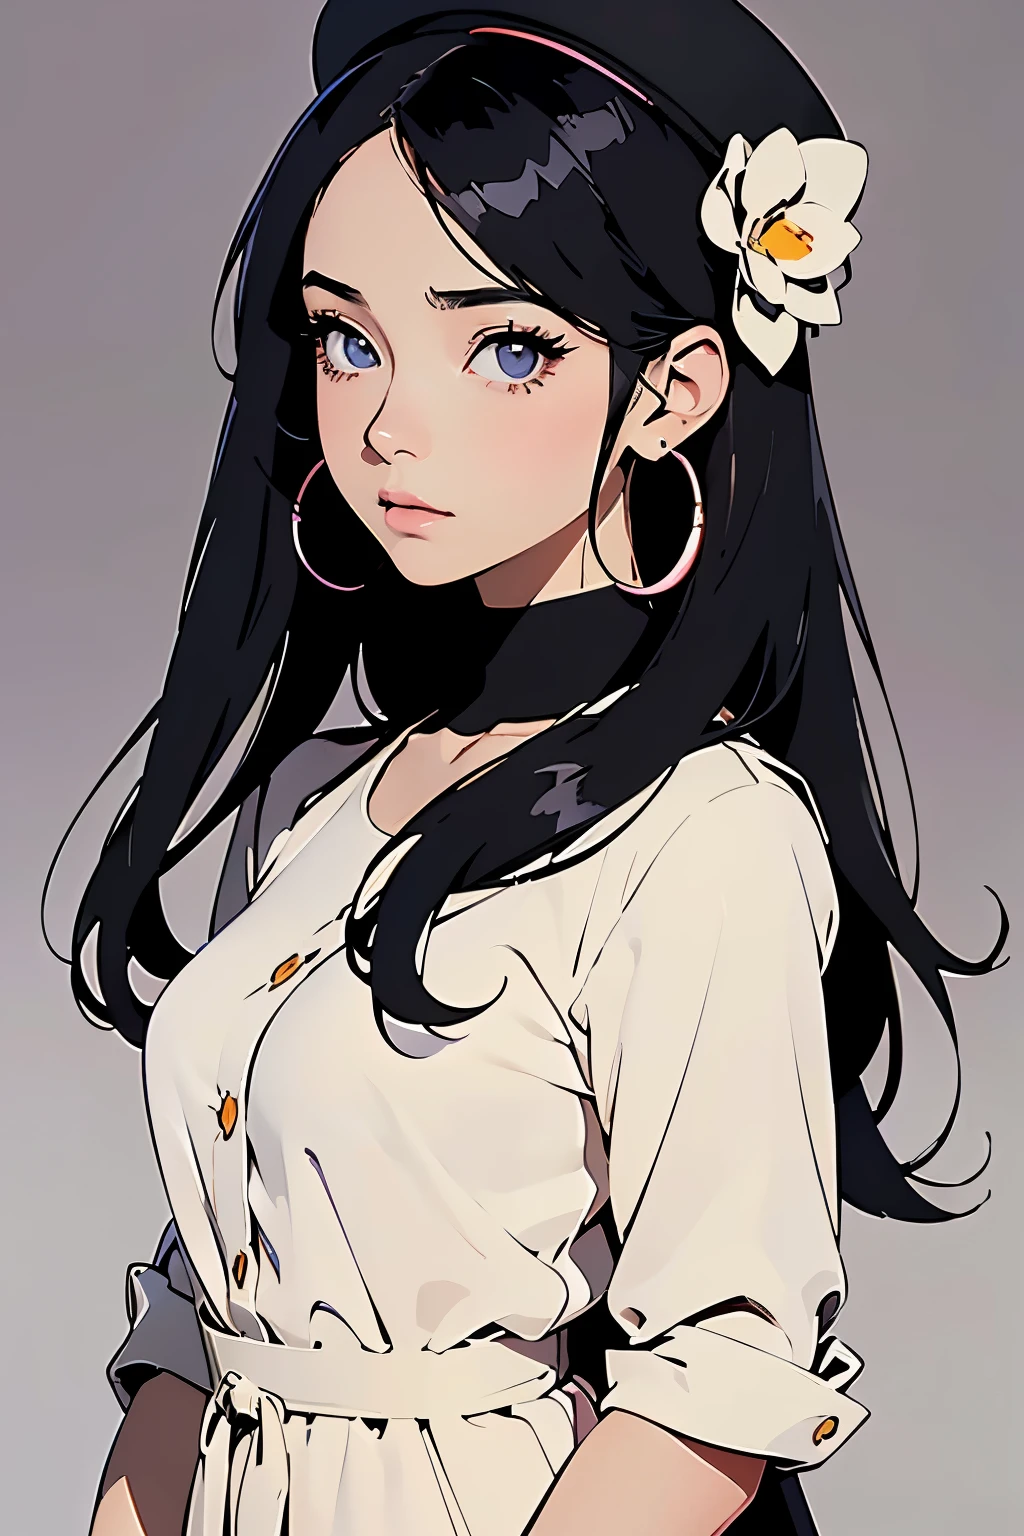 (masterpiece), best quality, beautiful woman, expressive eyes, perfect face,1 woman, a movie still of a girl with long black hair wearing a hat and earrings, anime style portrait, anime vibes, anime style illustration, beautiful anime portrait, beautiful anime style, beautiful anime art style, anime art style, high quality anime artstyle, anime girl, anime style character, anime style 4 k, anime visual of a cute girl, in an anime style, young anime girl, soft light, strong linework, ((cel shaded style)), line art, simple background, modernism, natural style, neon, detailed iris, (first person point of view:1.3), anime